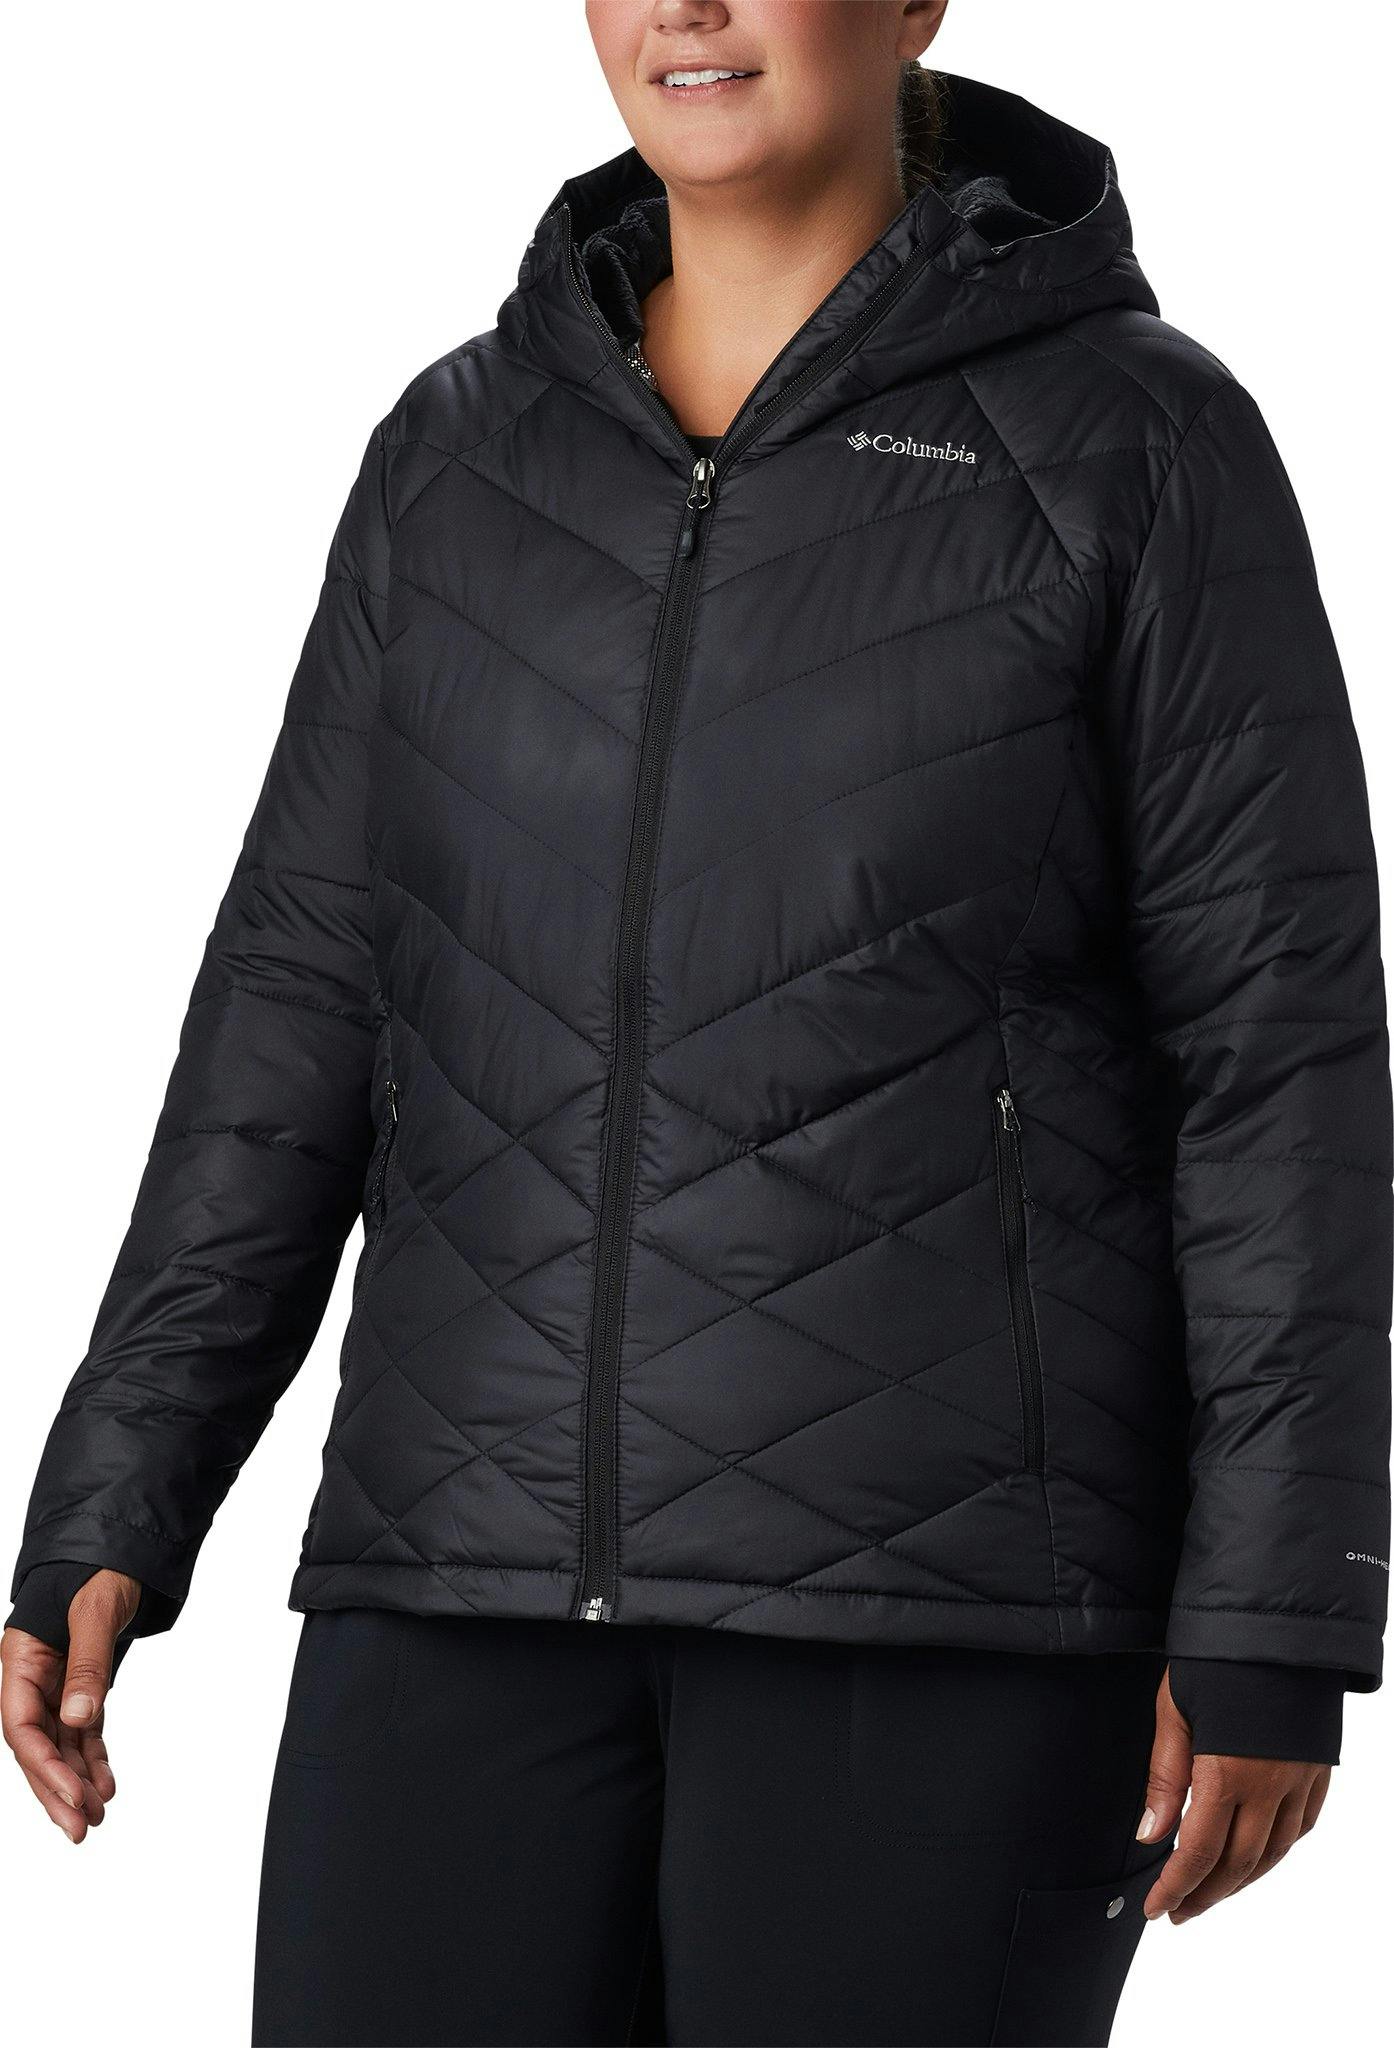 Product image for Heavenly Plus Size Hooded Jacket - Women's